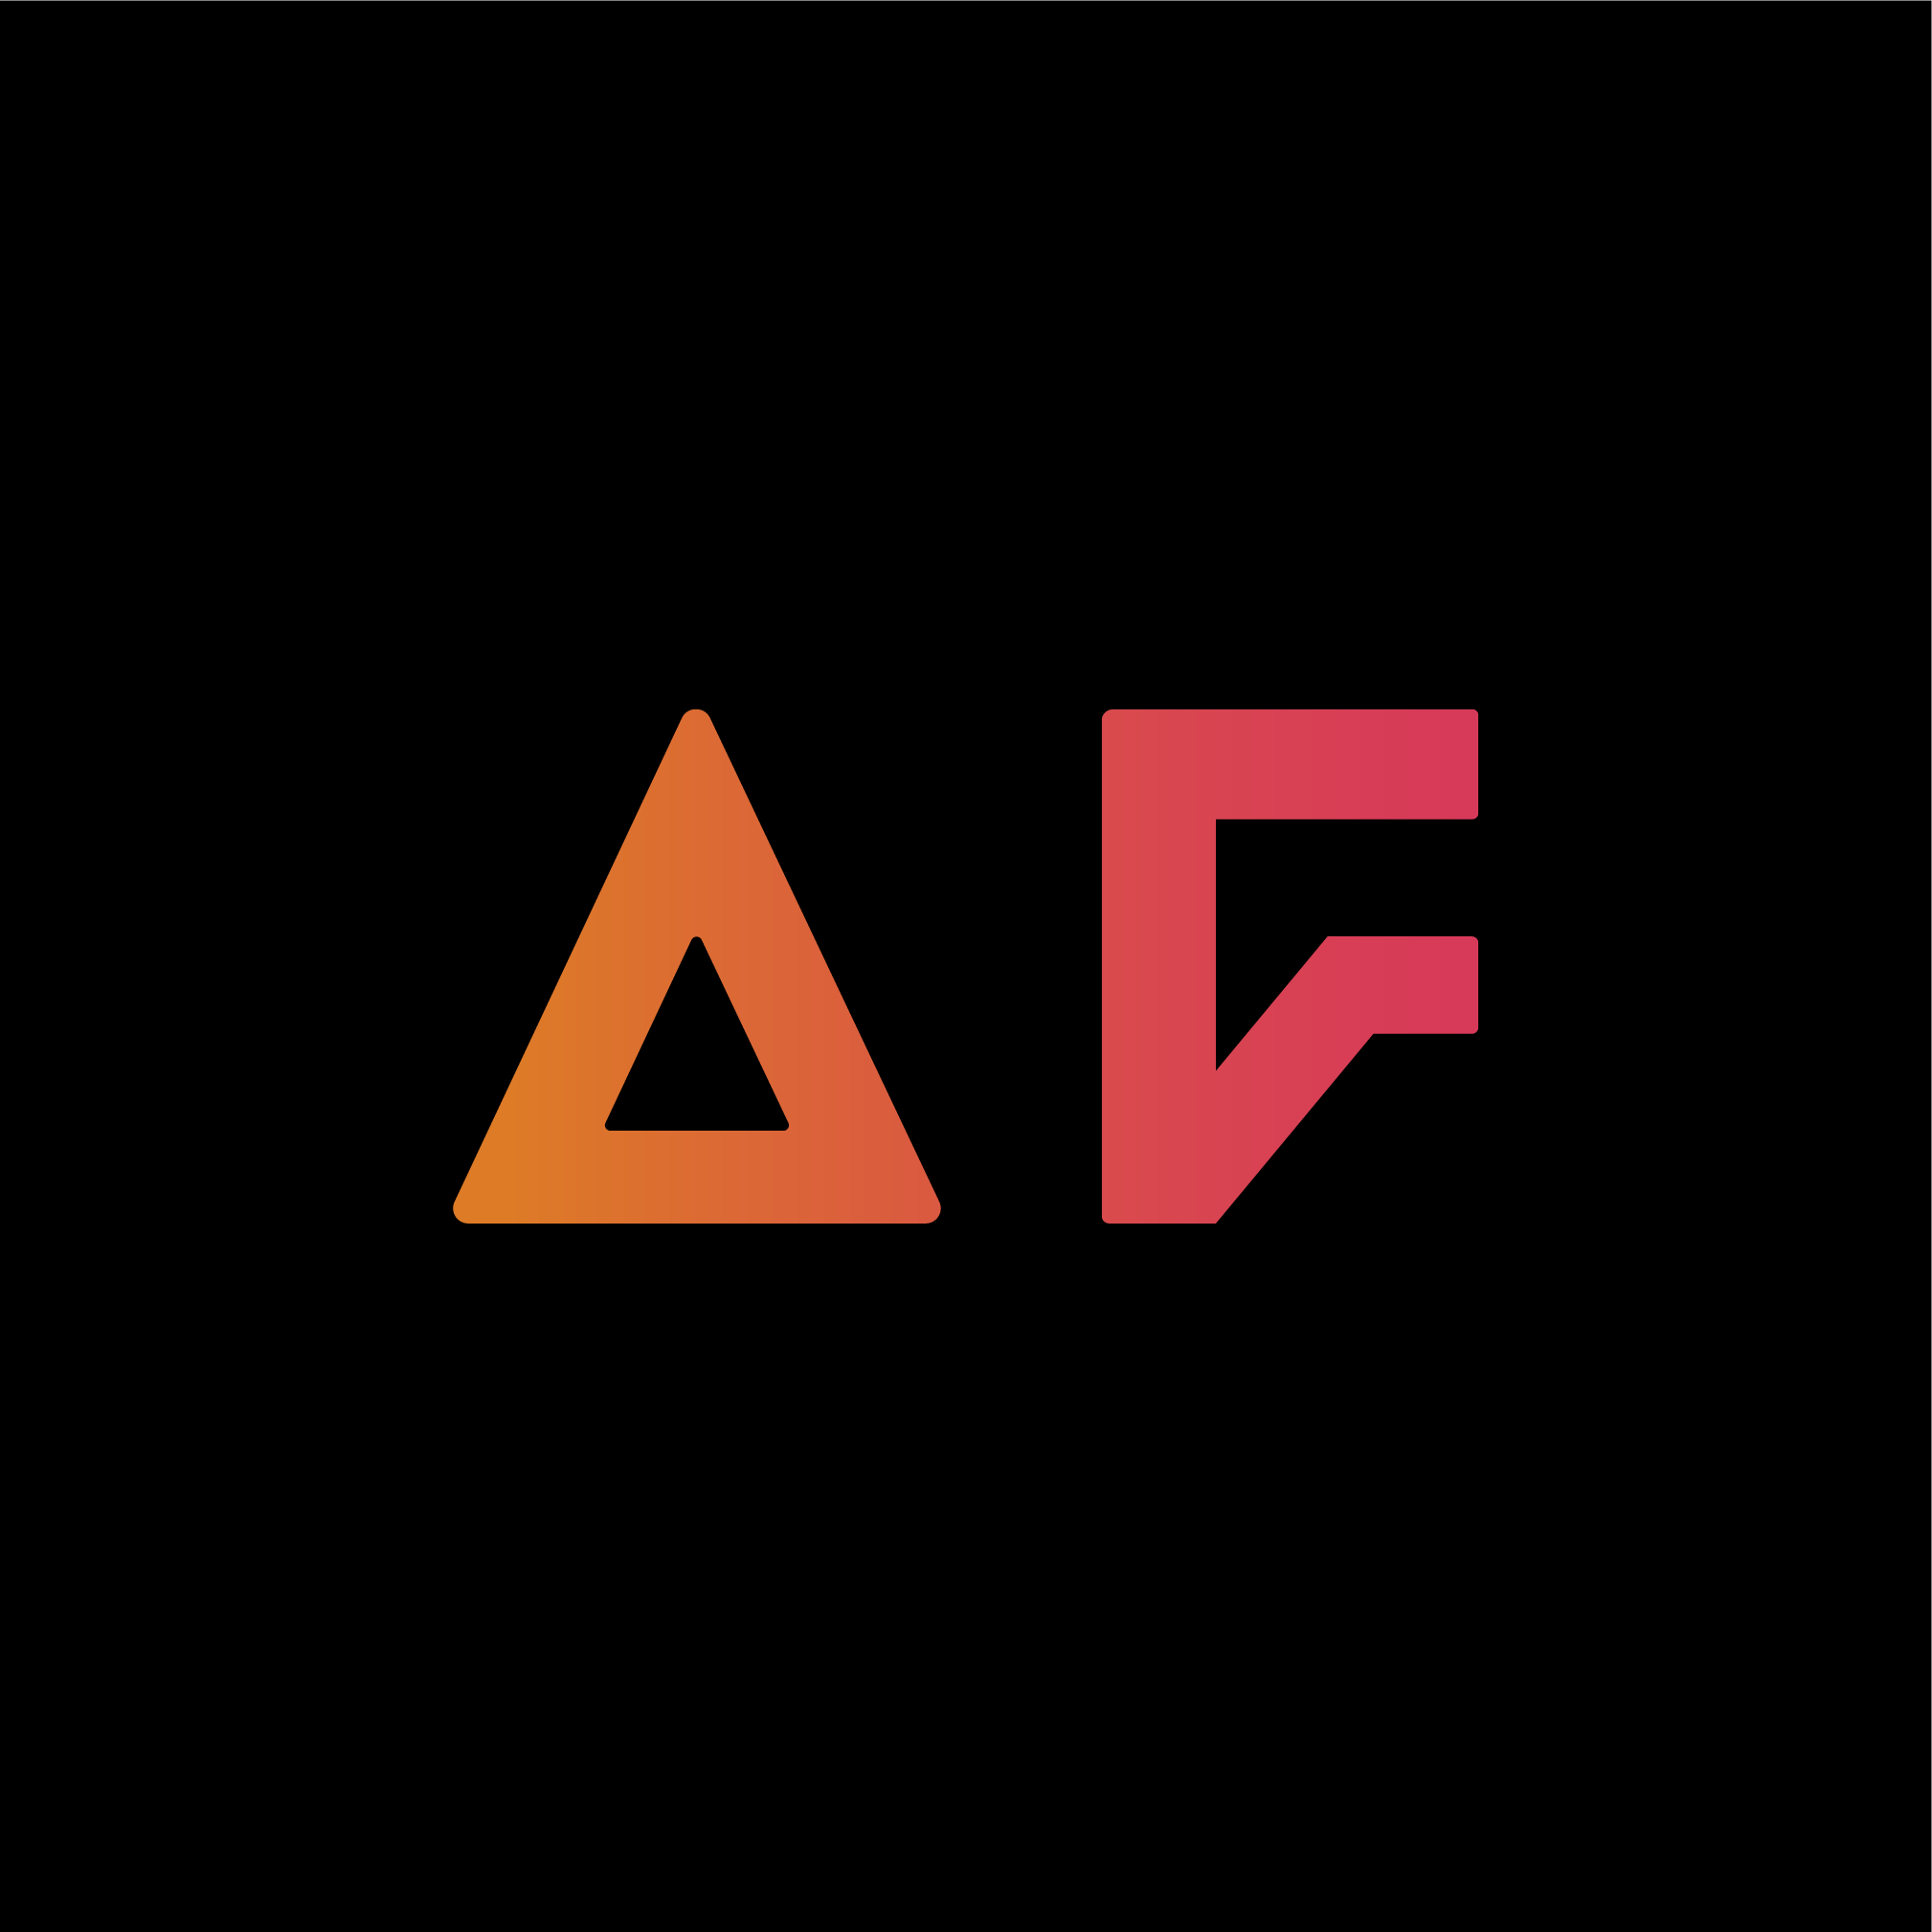 The Afternaut Group Private Limited logo